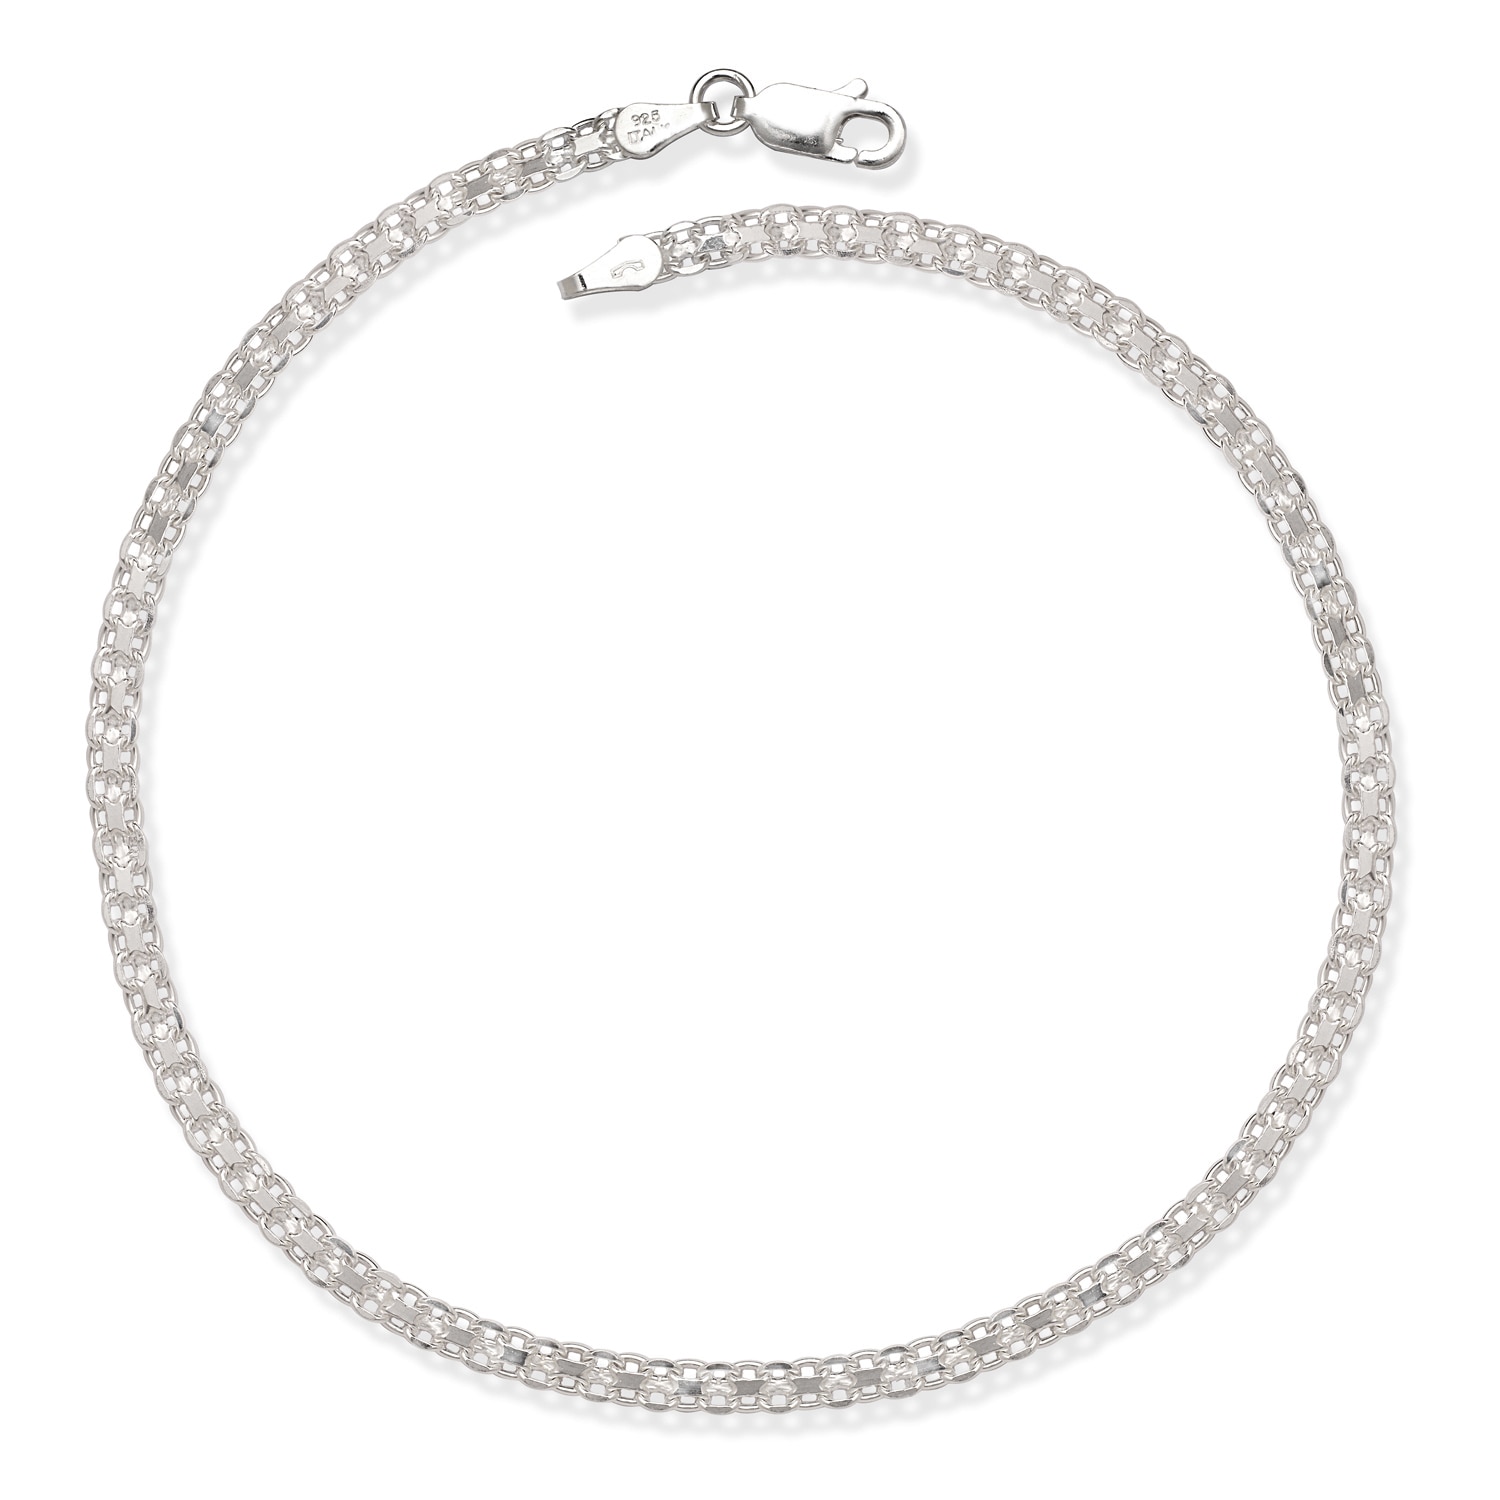 12 inch sterling silver anklets